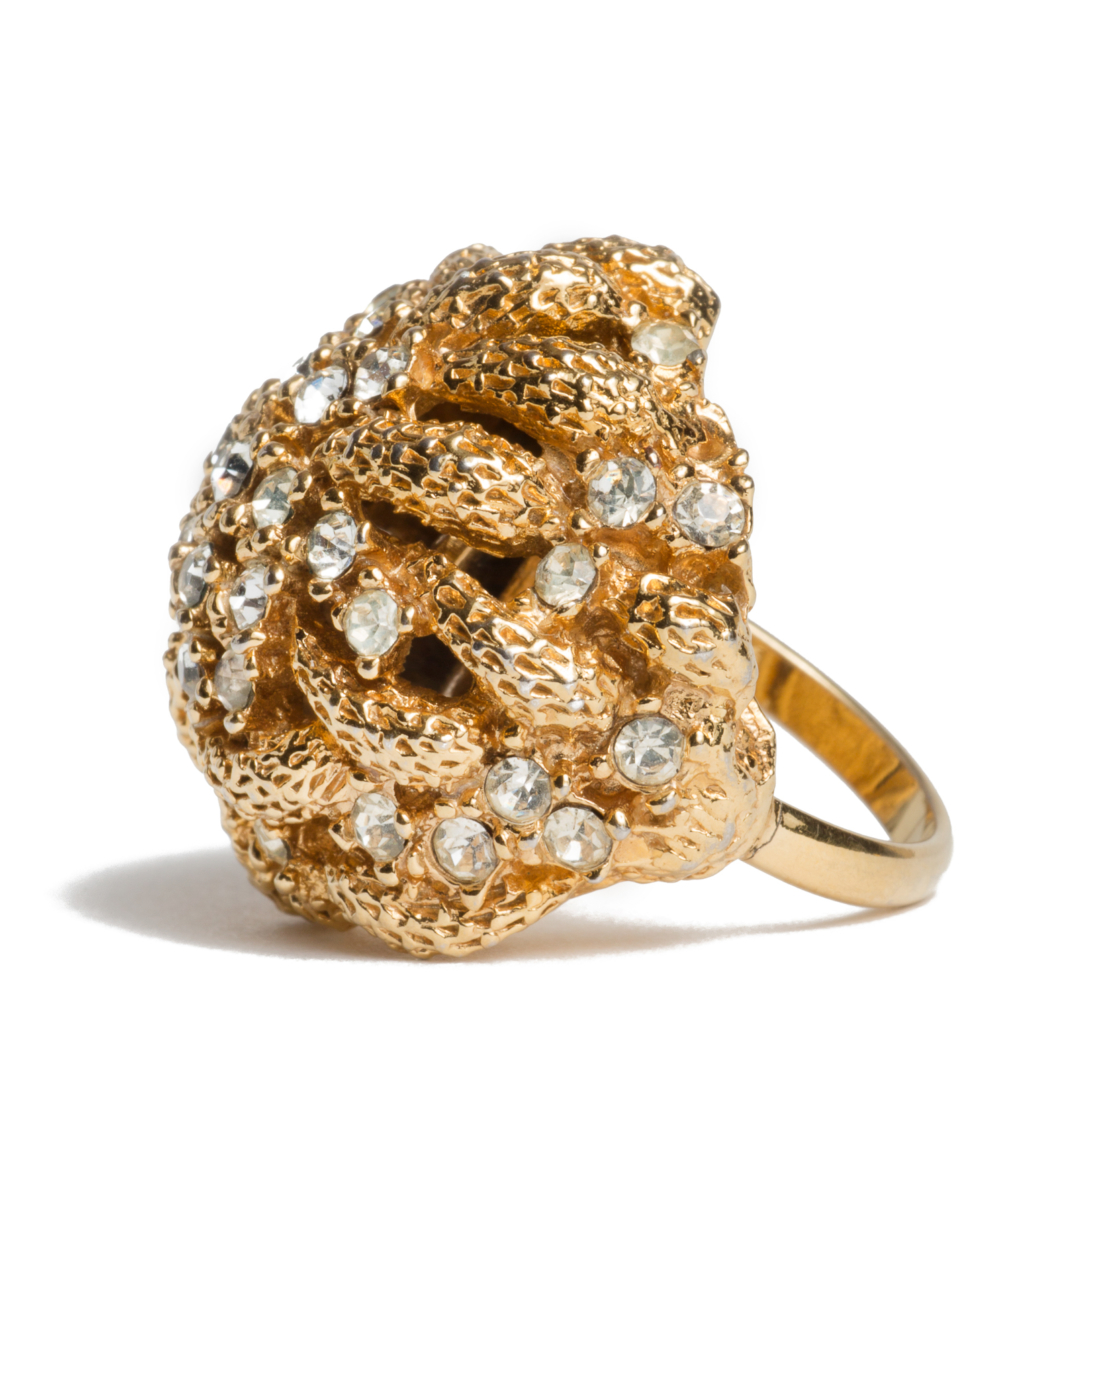 Vintage Gold and Rhinestone Holy Cluster Fabulous Cocktail Ring, circa 1950's